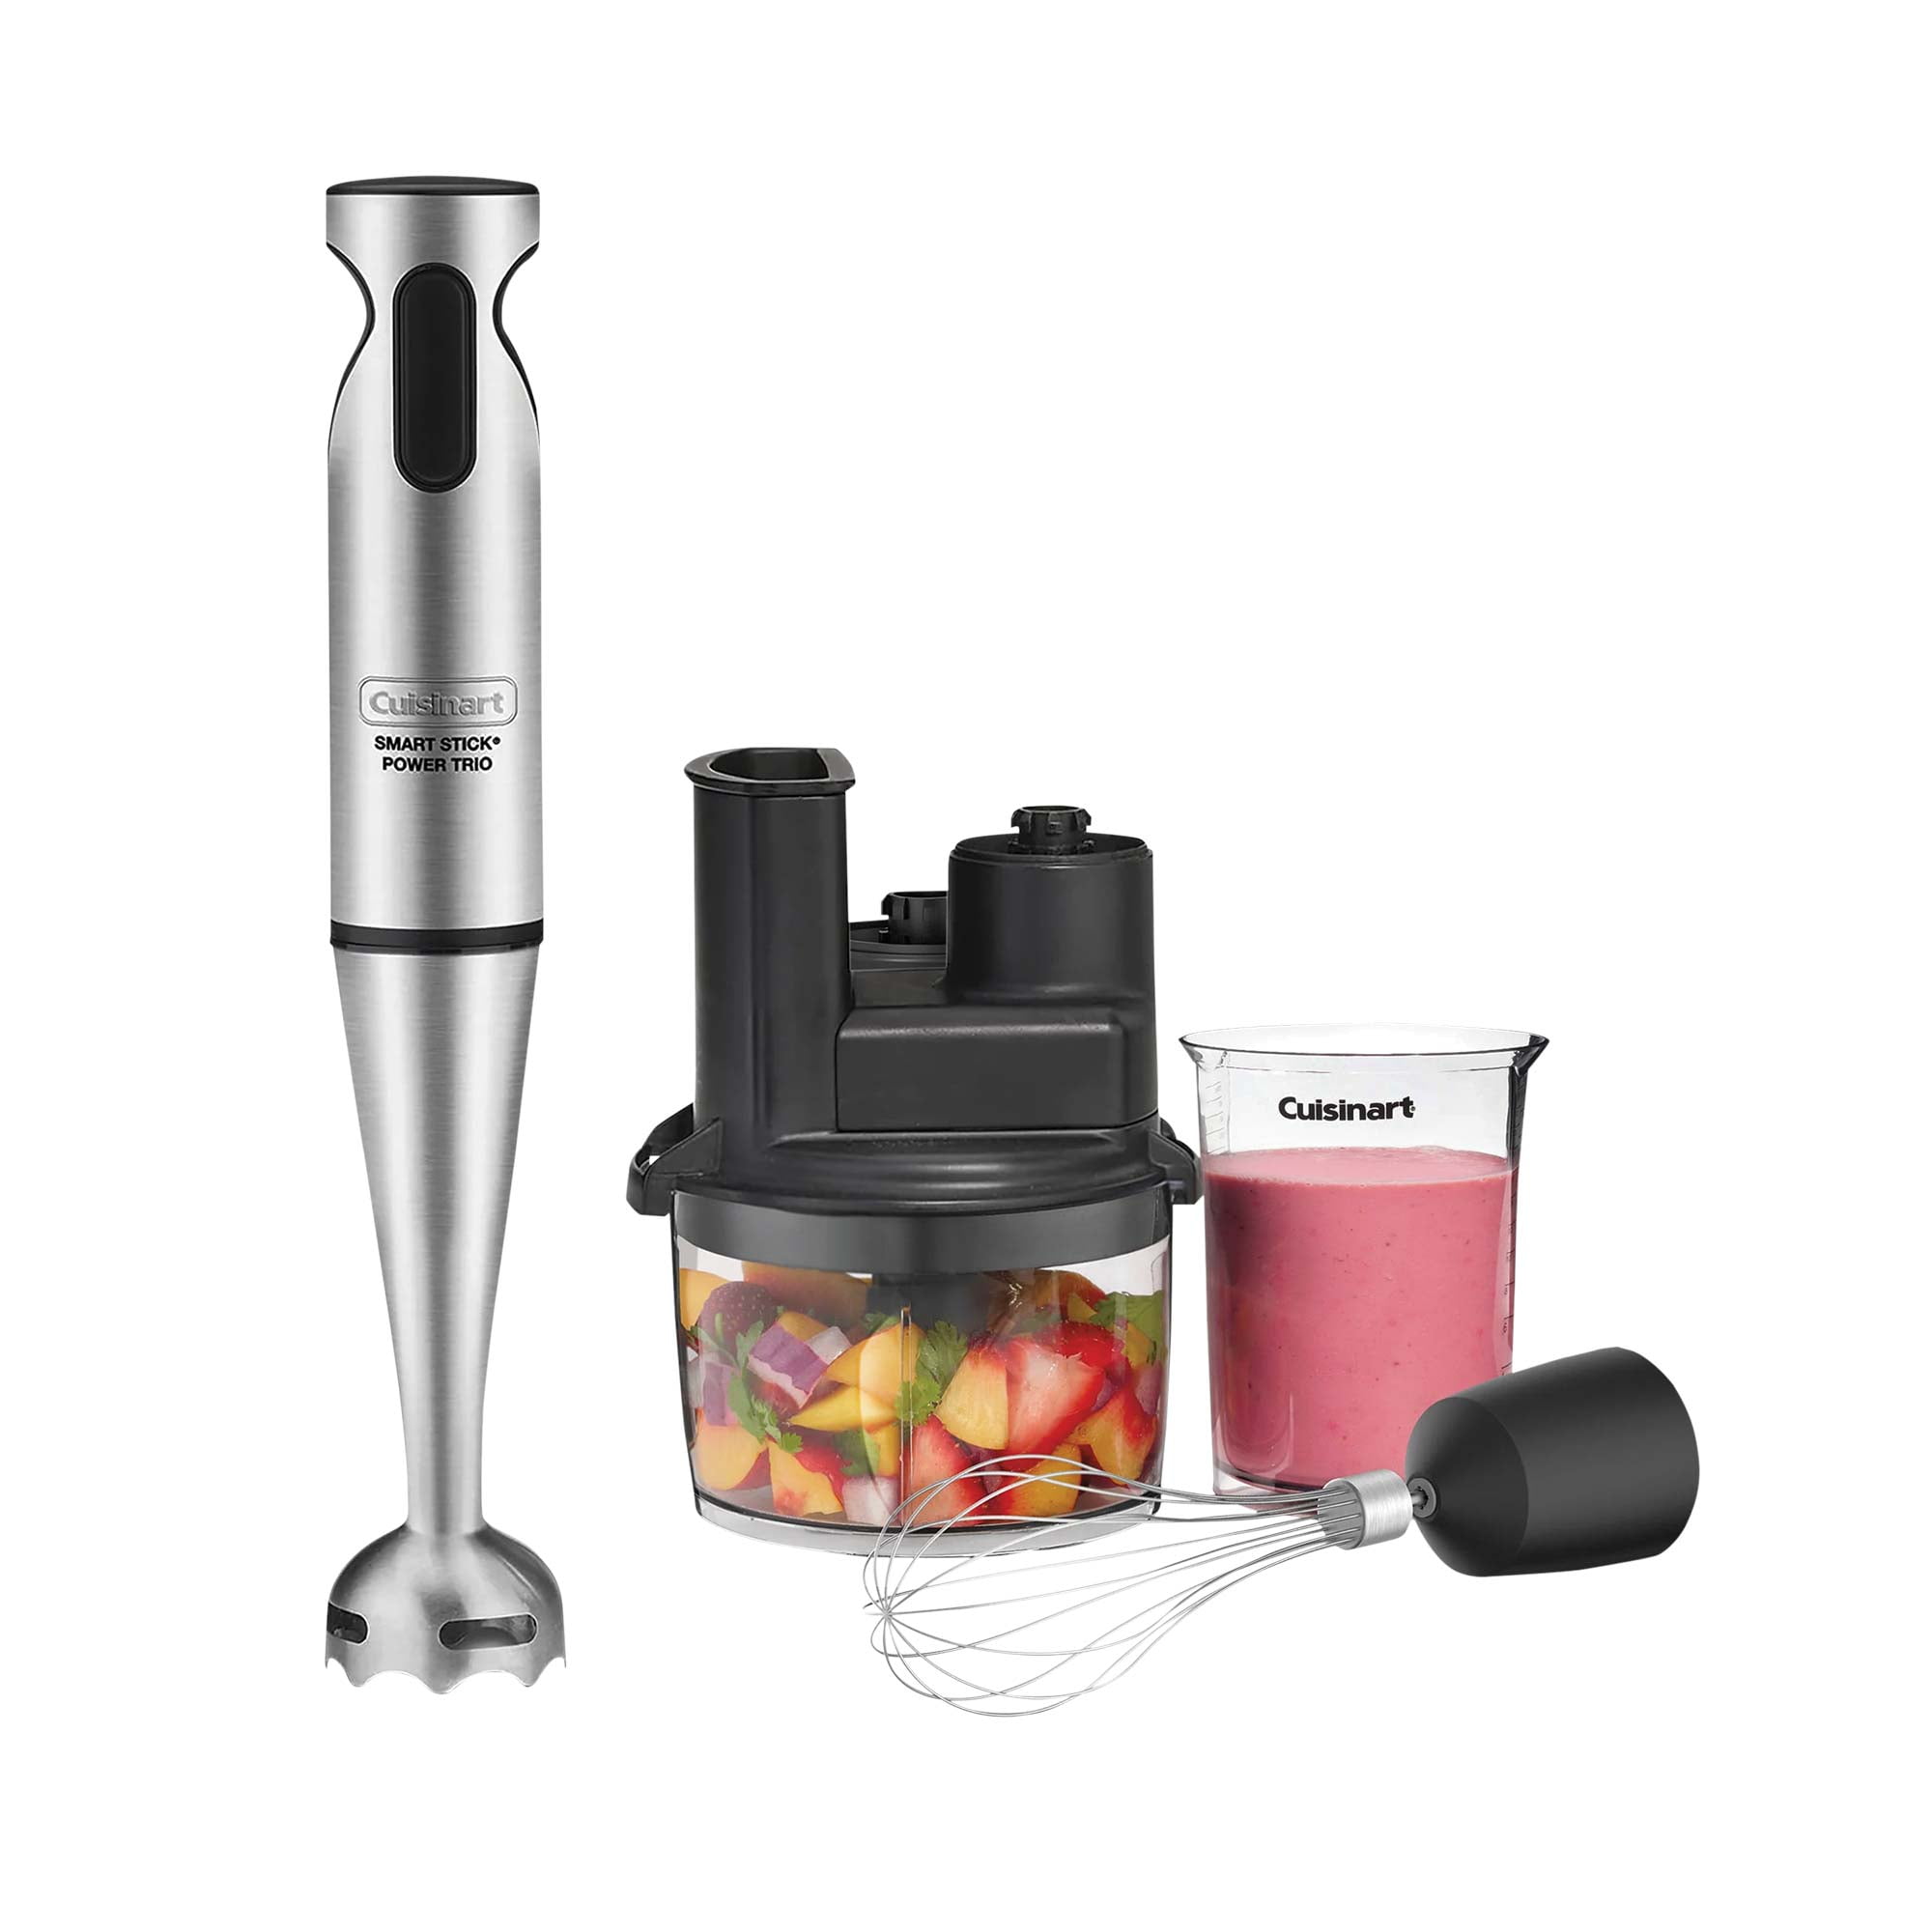 Cuisinart Smart Stick® Variable Speed Cordless Rechargeable Hand Blender  (CSB-300) Demo Video 